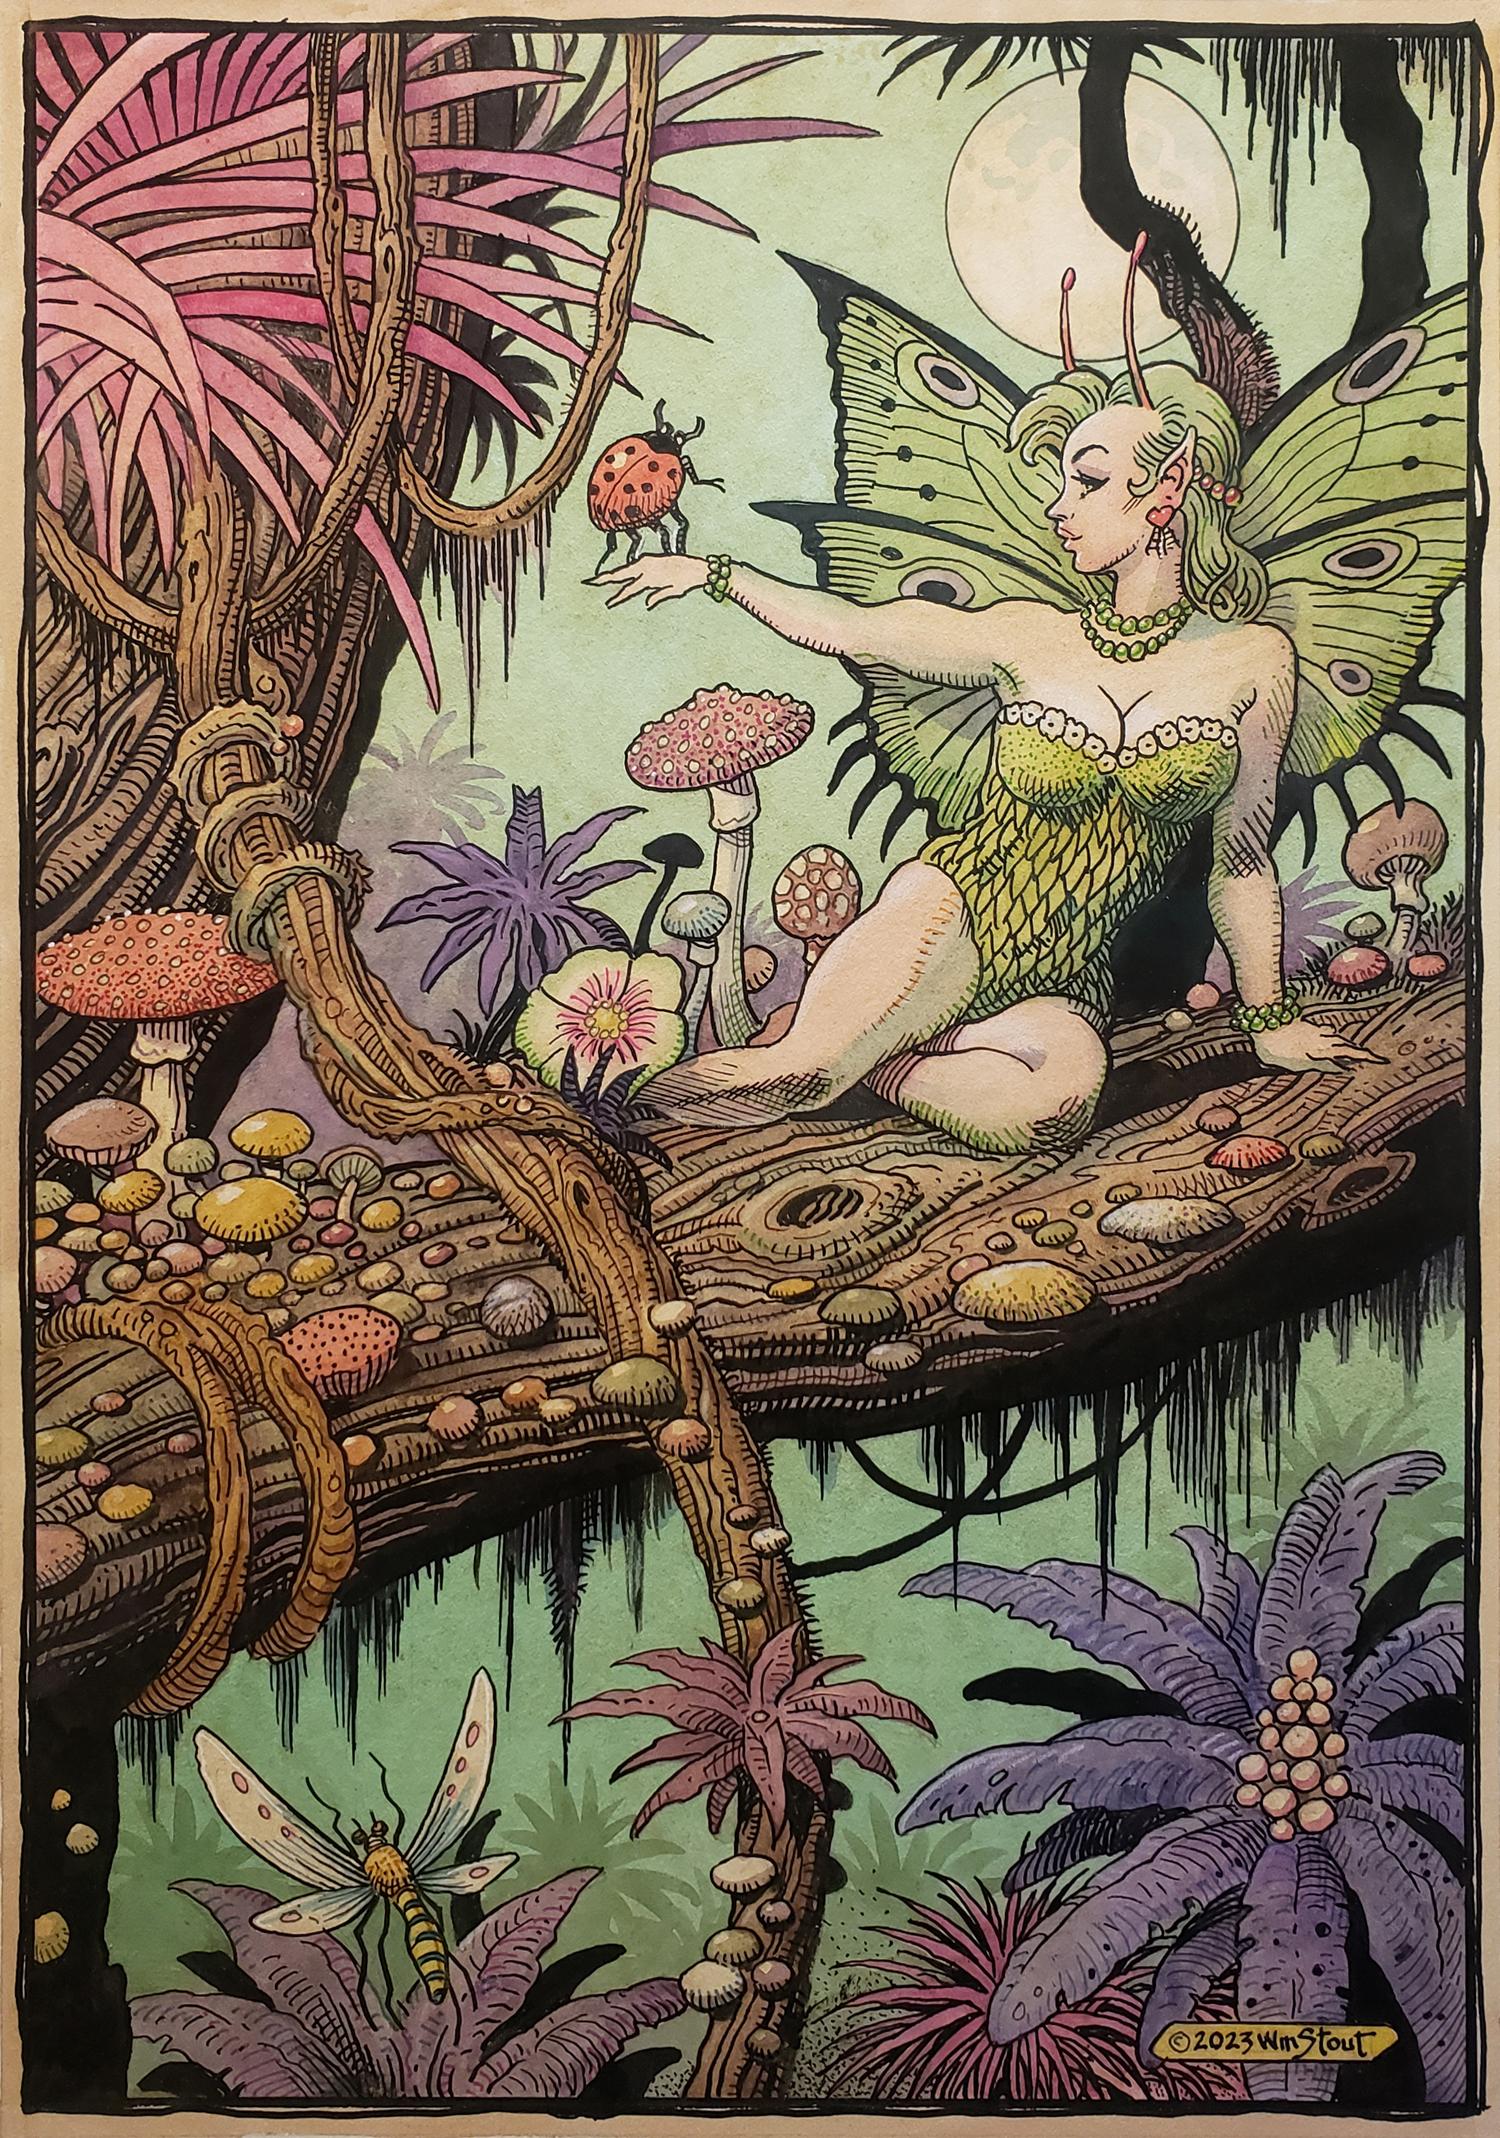 Tinker Bell - Art by William Stout